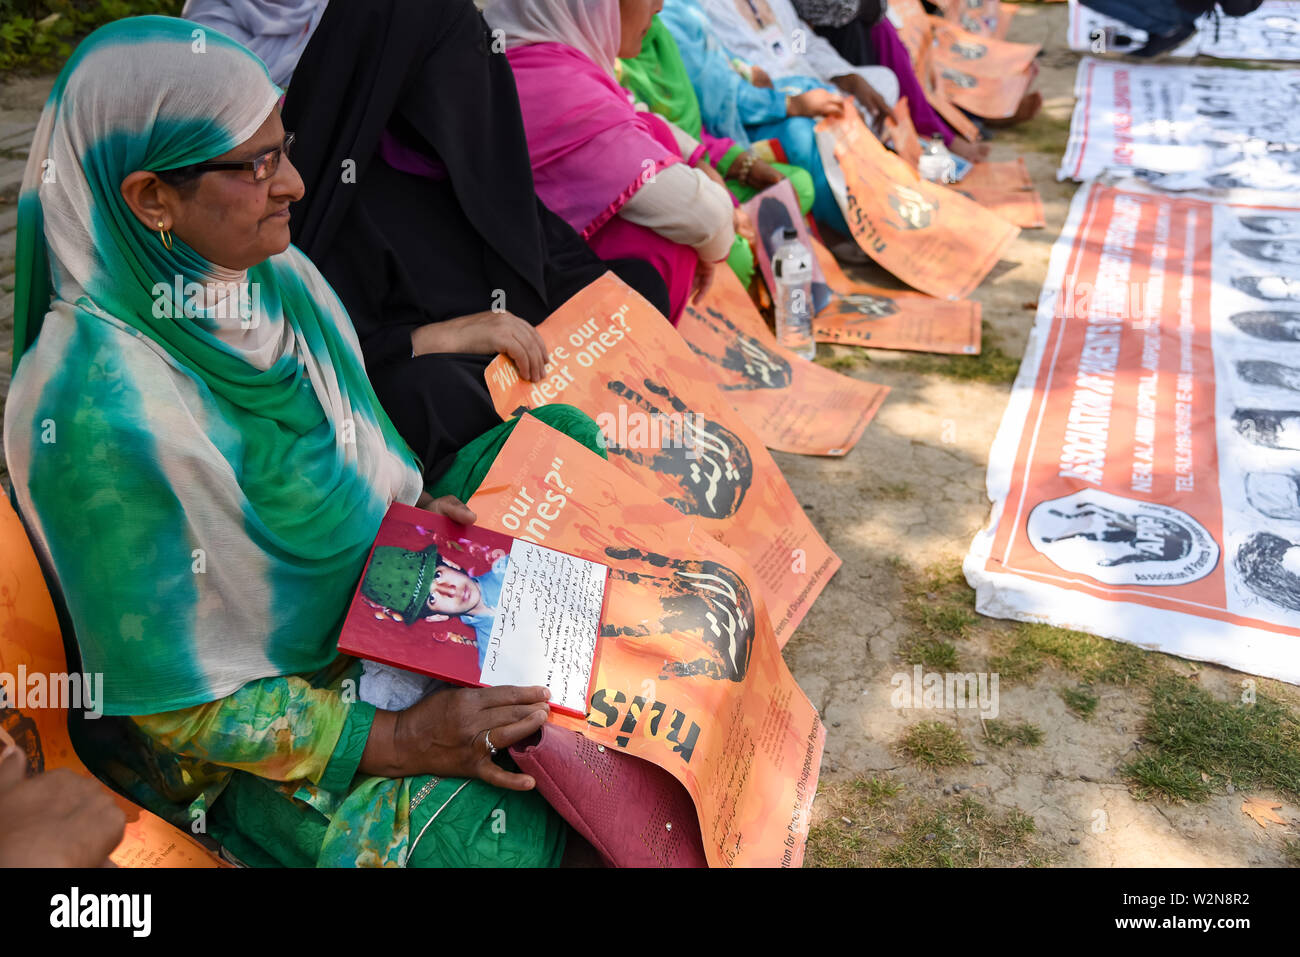 Family Members of the Disappeared Persons hold placards during a demonstration in Srinagar.Association of Parents of Disappeared Persons (APDP) welcomes the recent human rights report from the office of the United Nations High Commissioner for Human Rights (OHCHR) on the situation of human rights in Kashmir Valley published on 08th July 2019. The report covers the human rights violation in Kashmir from May 2018 to April 2019. The OHCHR report highlighted the gross human rights violation done by the military apparatus of India in Kashmir, including enforced disappearances, unlawful killings of Stock Photo